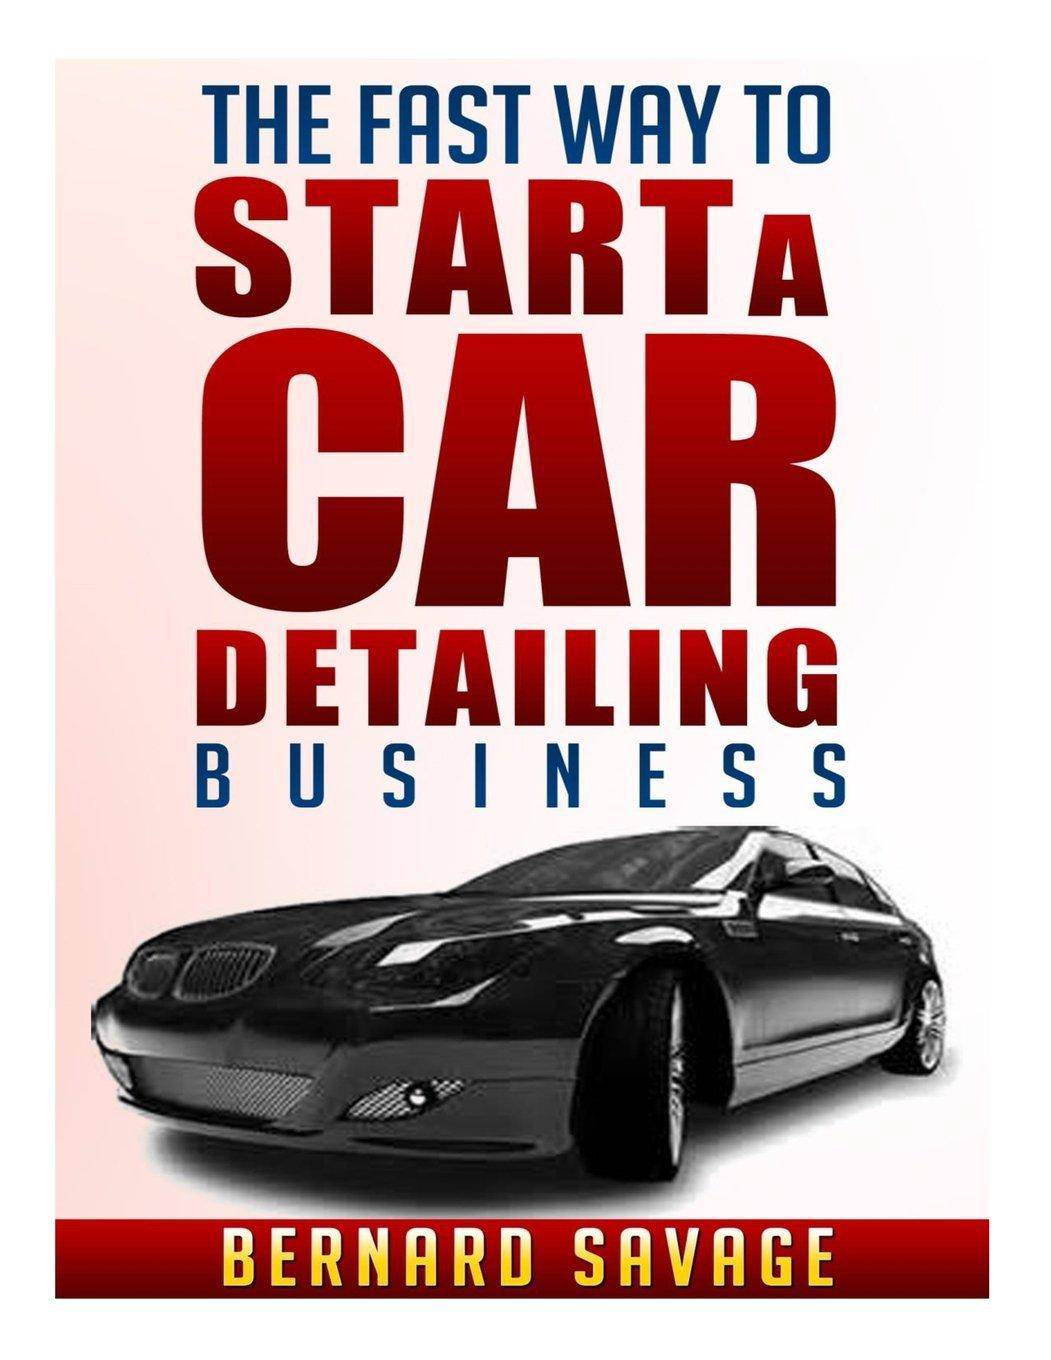 The Fast Way to start a Car Detailing Business - SureShot Books Publishing LLC